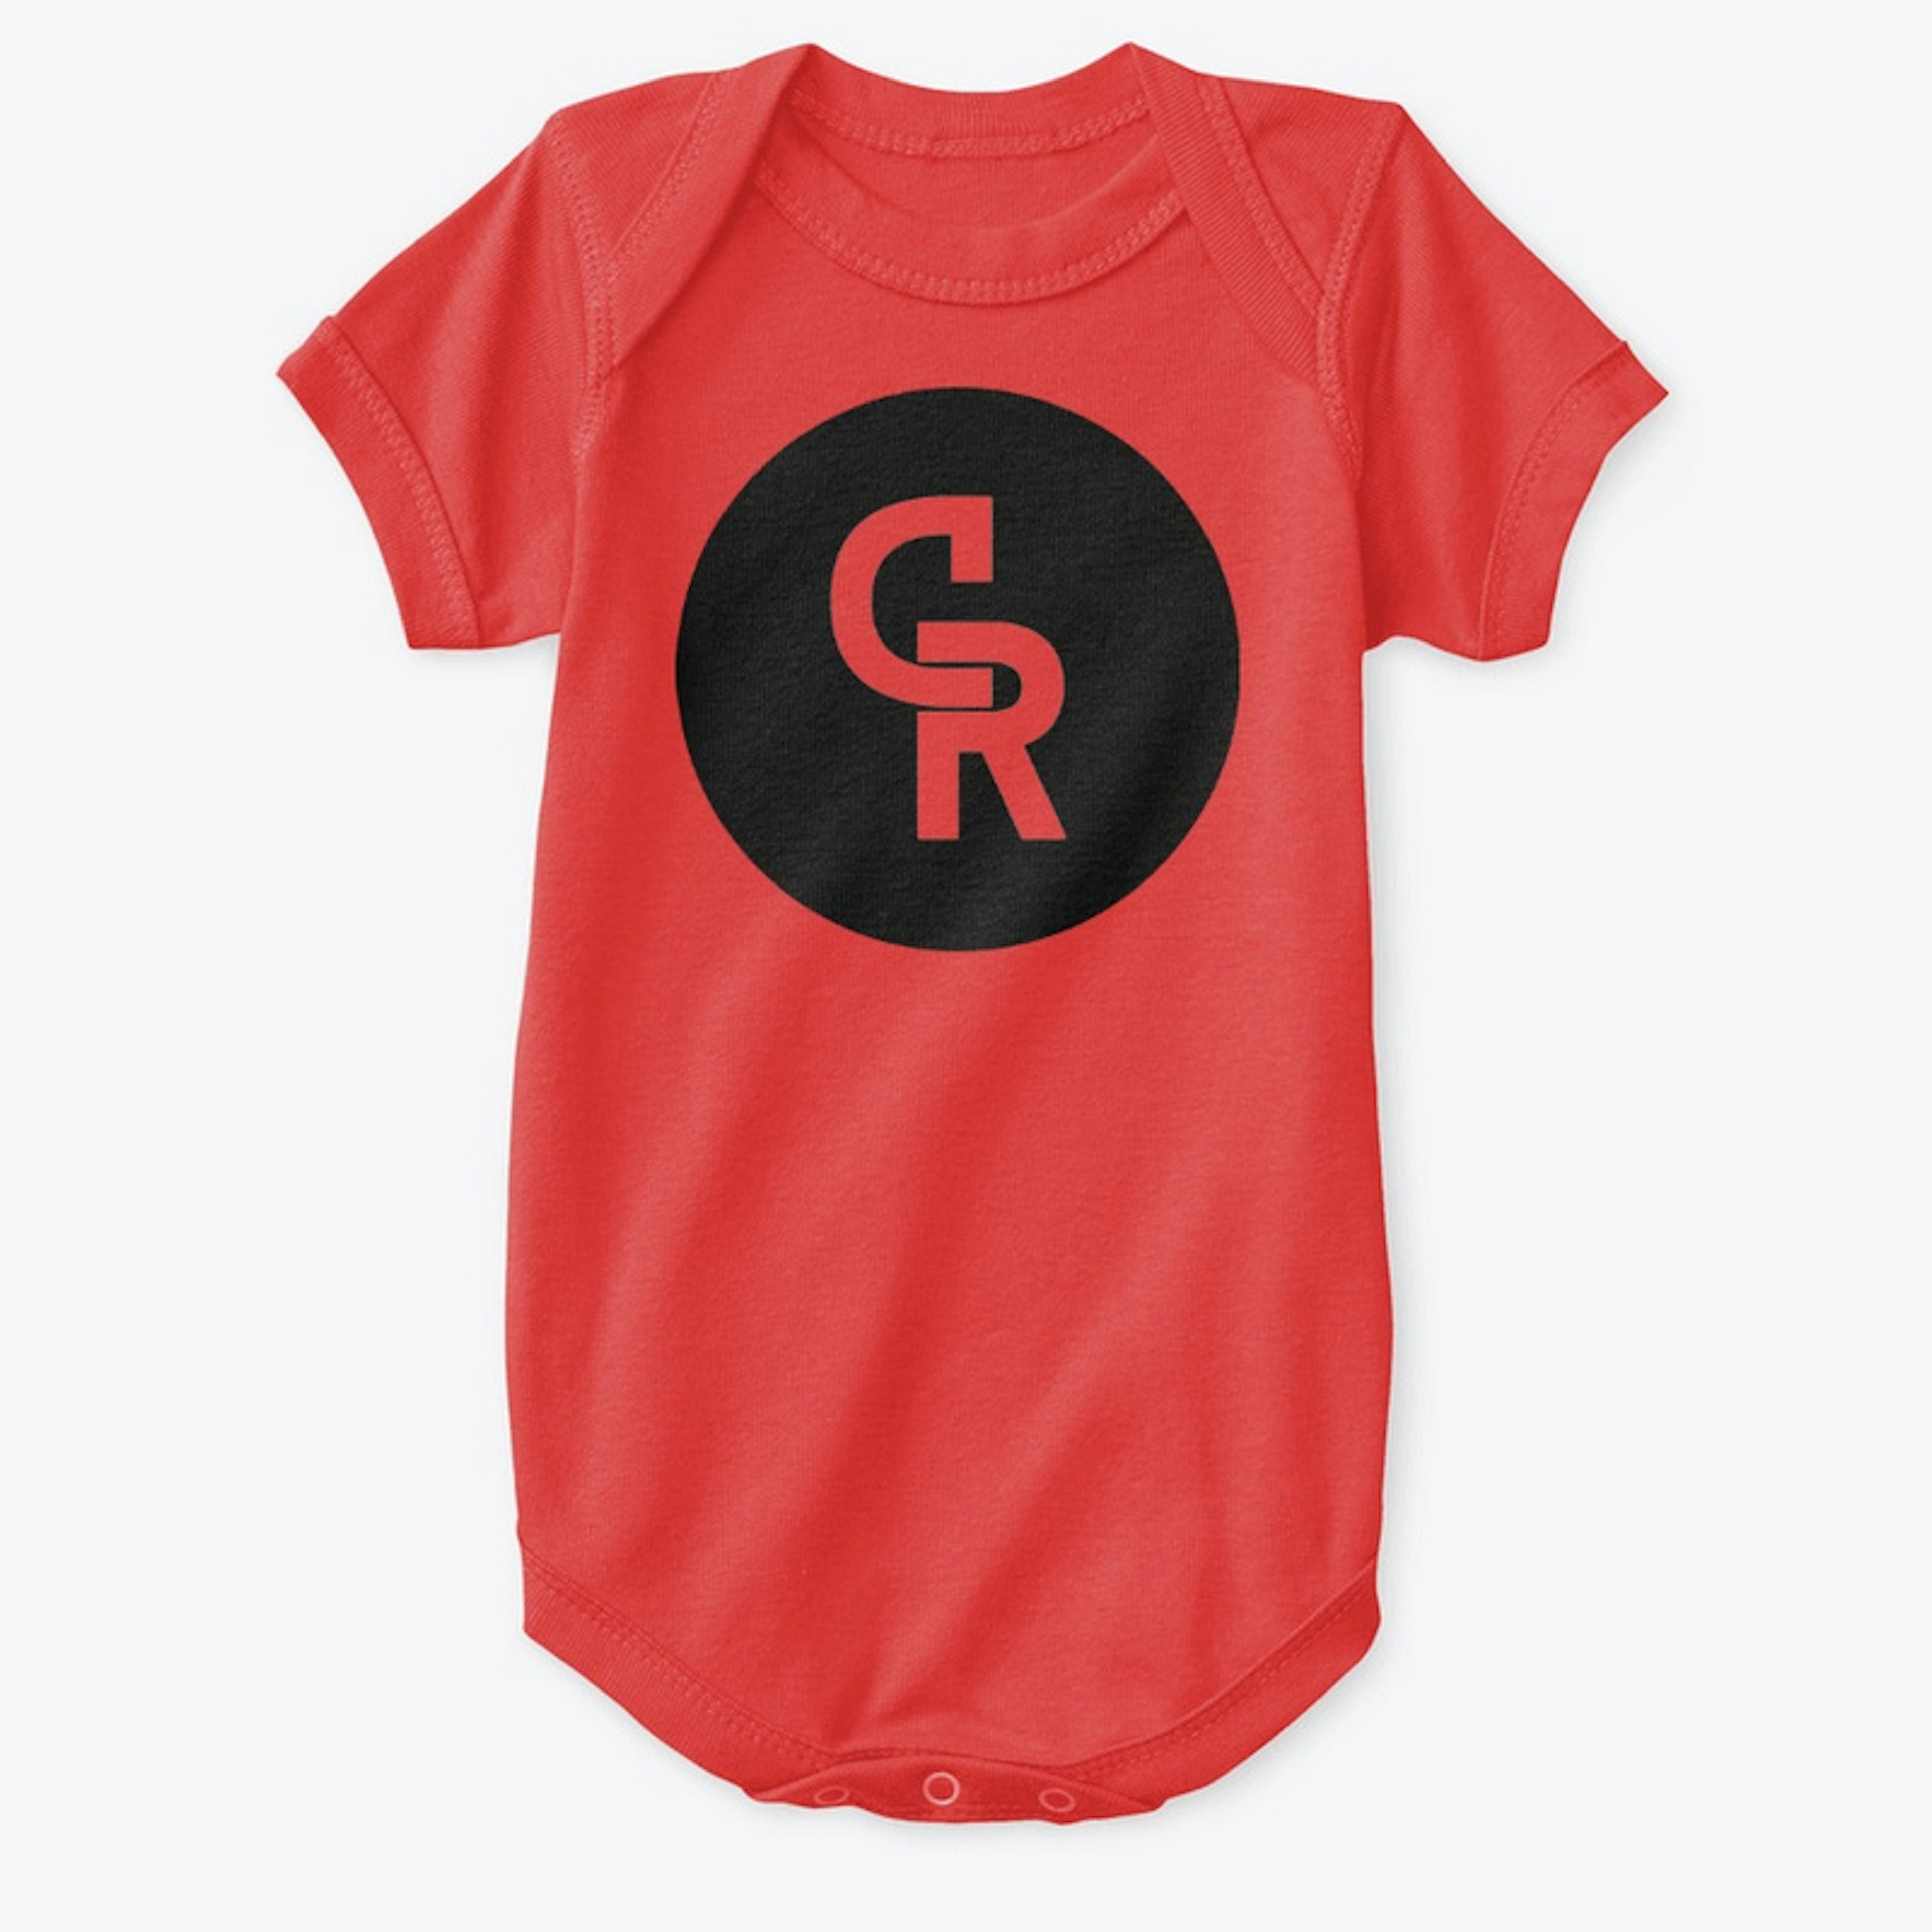 Canti Records Baby - Toddler Tops